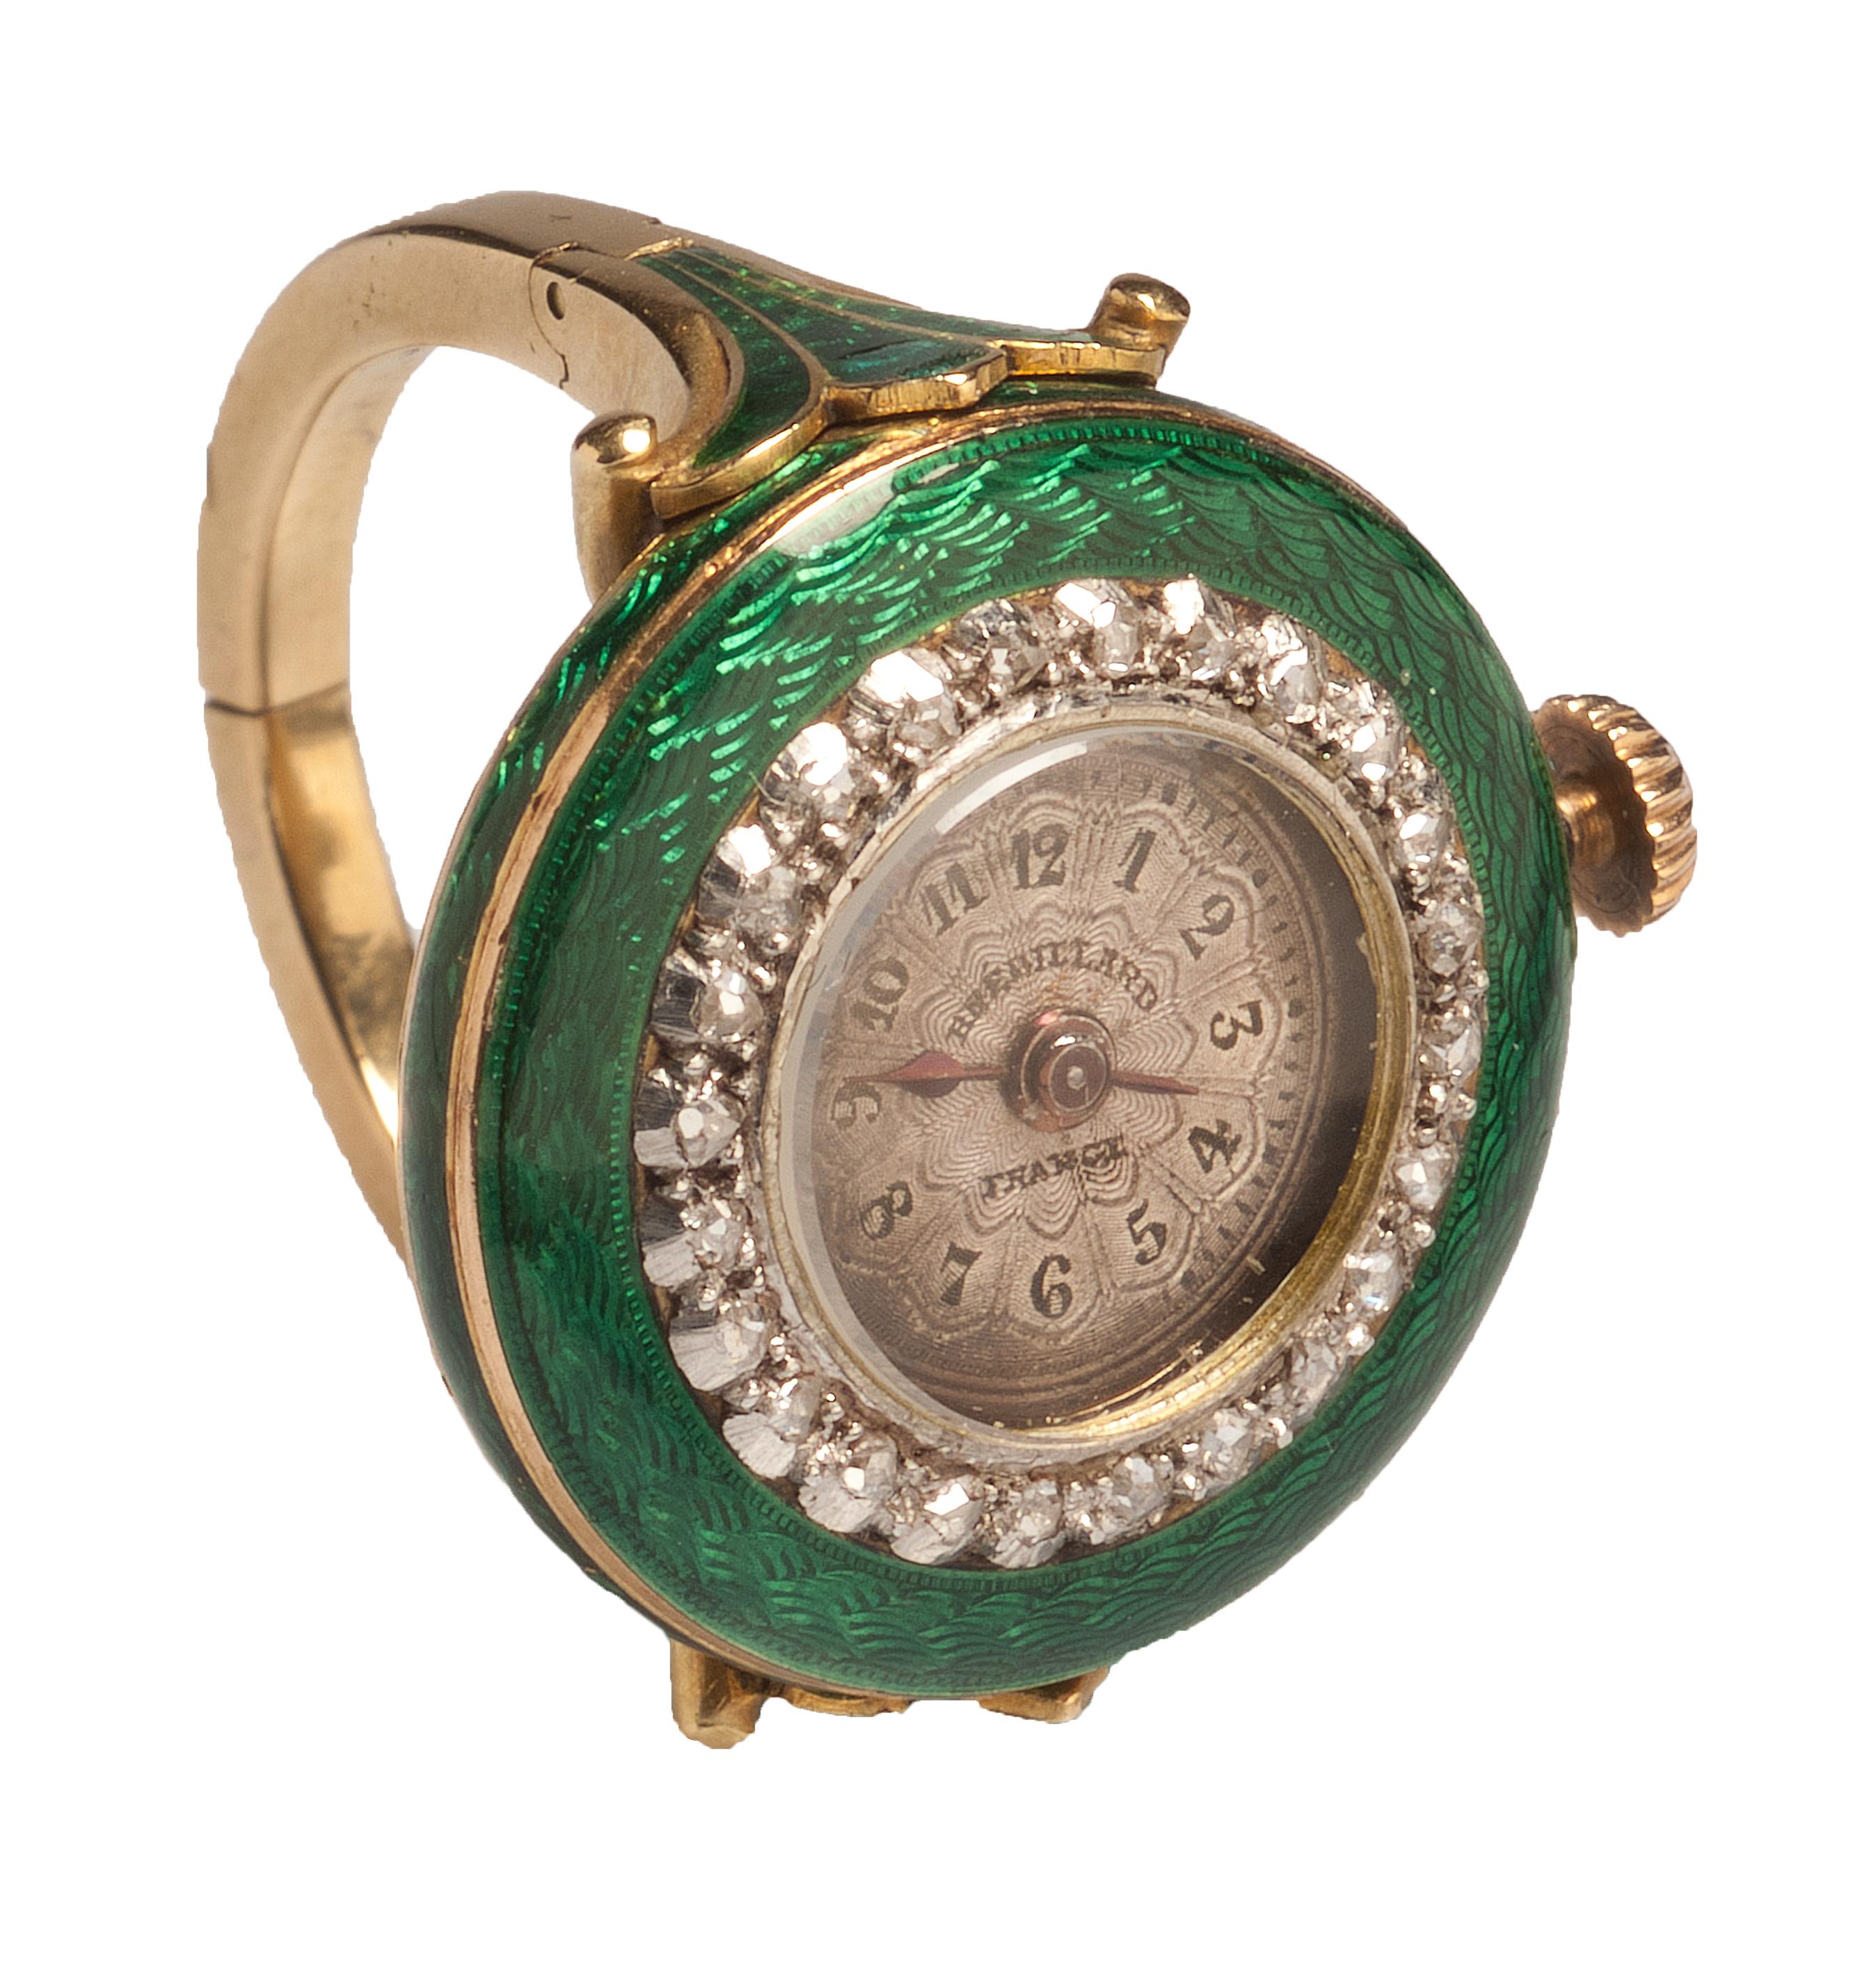 WATCH RING BY BRÉDILLARD
France, Paris, c. 1900-1910
Gold, diamonds and green enamel
Weight 11.6 gr., US size 6.5, UK size N

This gold ring is composed of a hoop with square section and hinged shoulders shaped like stylized palmettes with